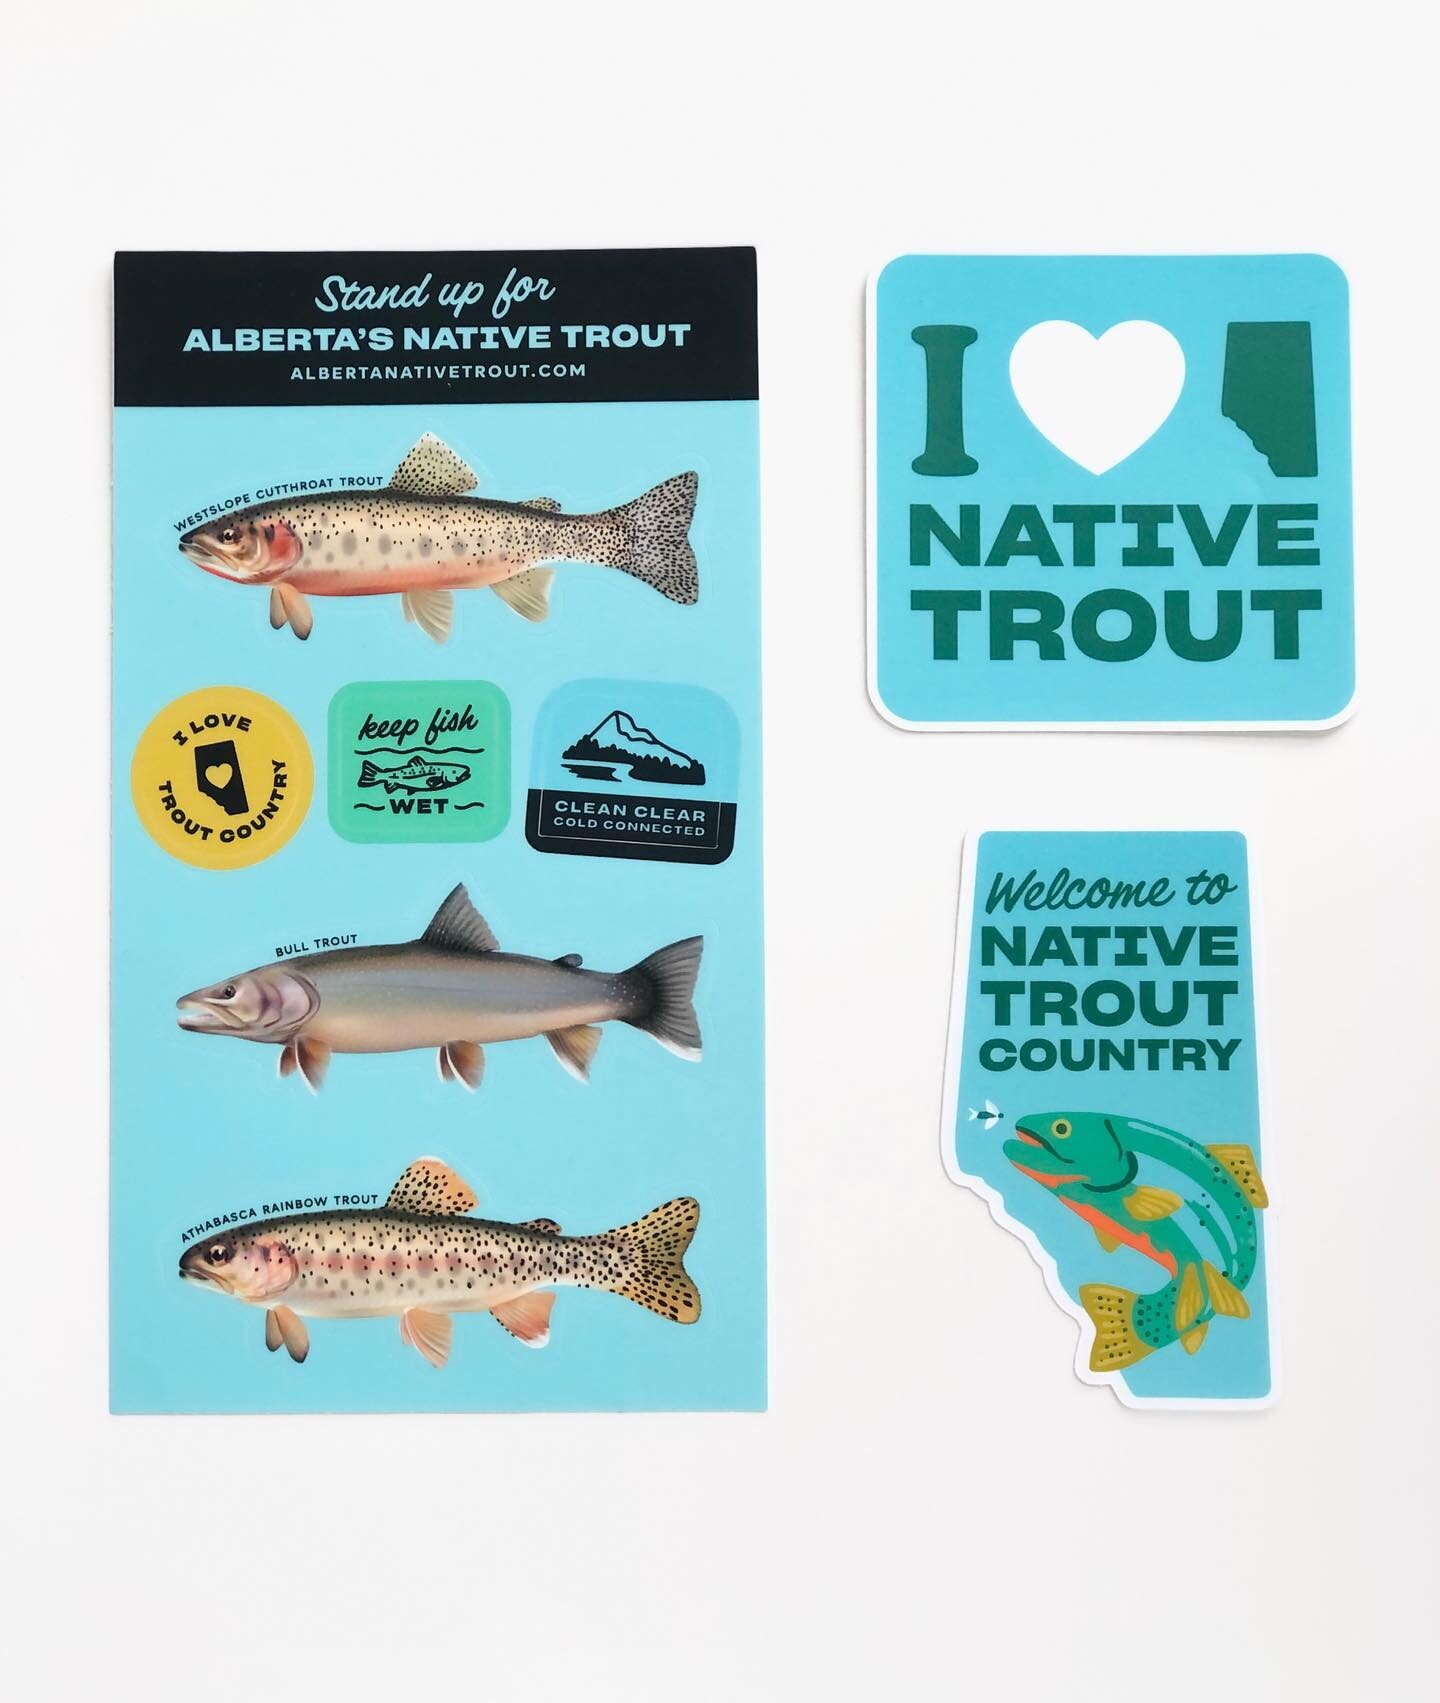 Made some fun stickers for Alberta&rsquo;s Native Trout Collaborative! When angling make sure you&rsquo;re aware of these threatened trout species by putting these easy identification stickers on your tackle box or water bottle. Learn how to take car